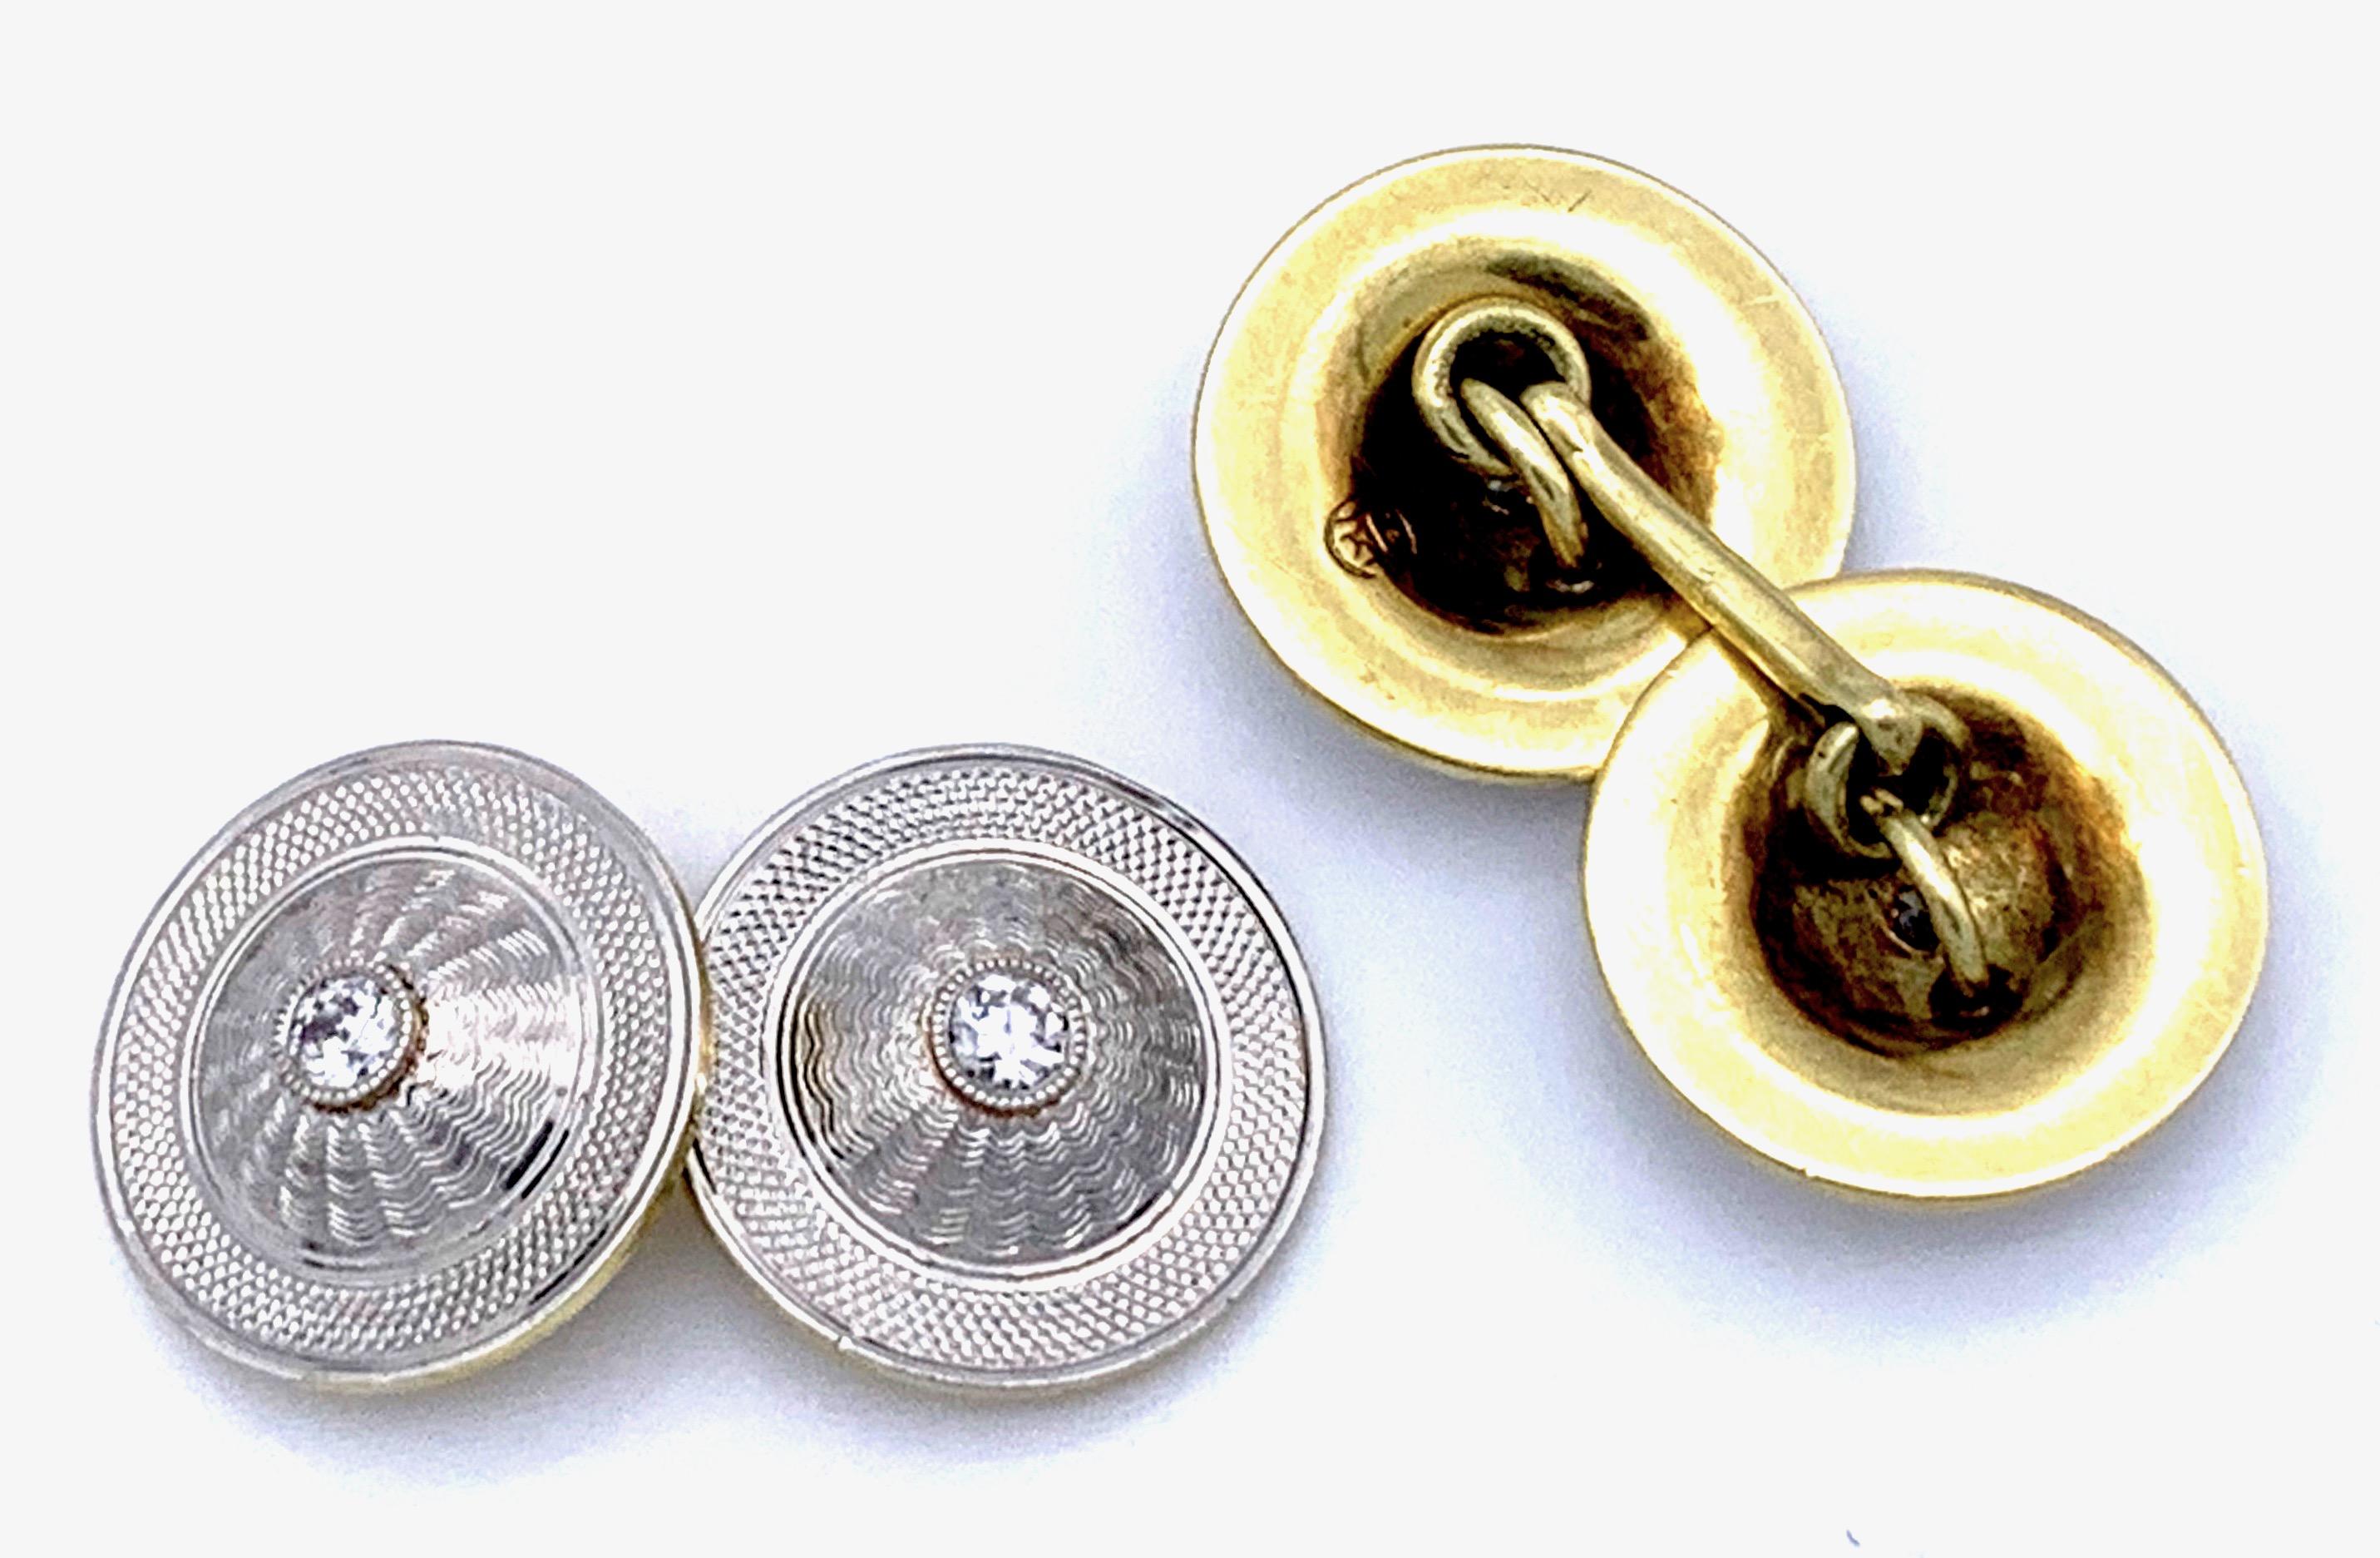 These very attractive and elegant cufflinks are designed as round,  gold backed platinum elements with two different kinds of engravings. 
The reverse of the links have engraved the ligated letters C and H and the number 14.  Each disk is